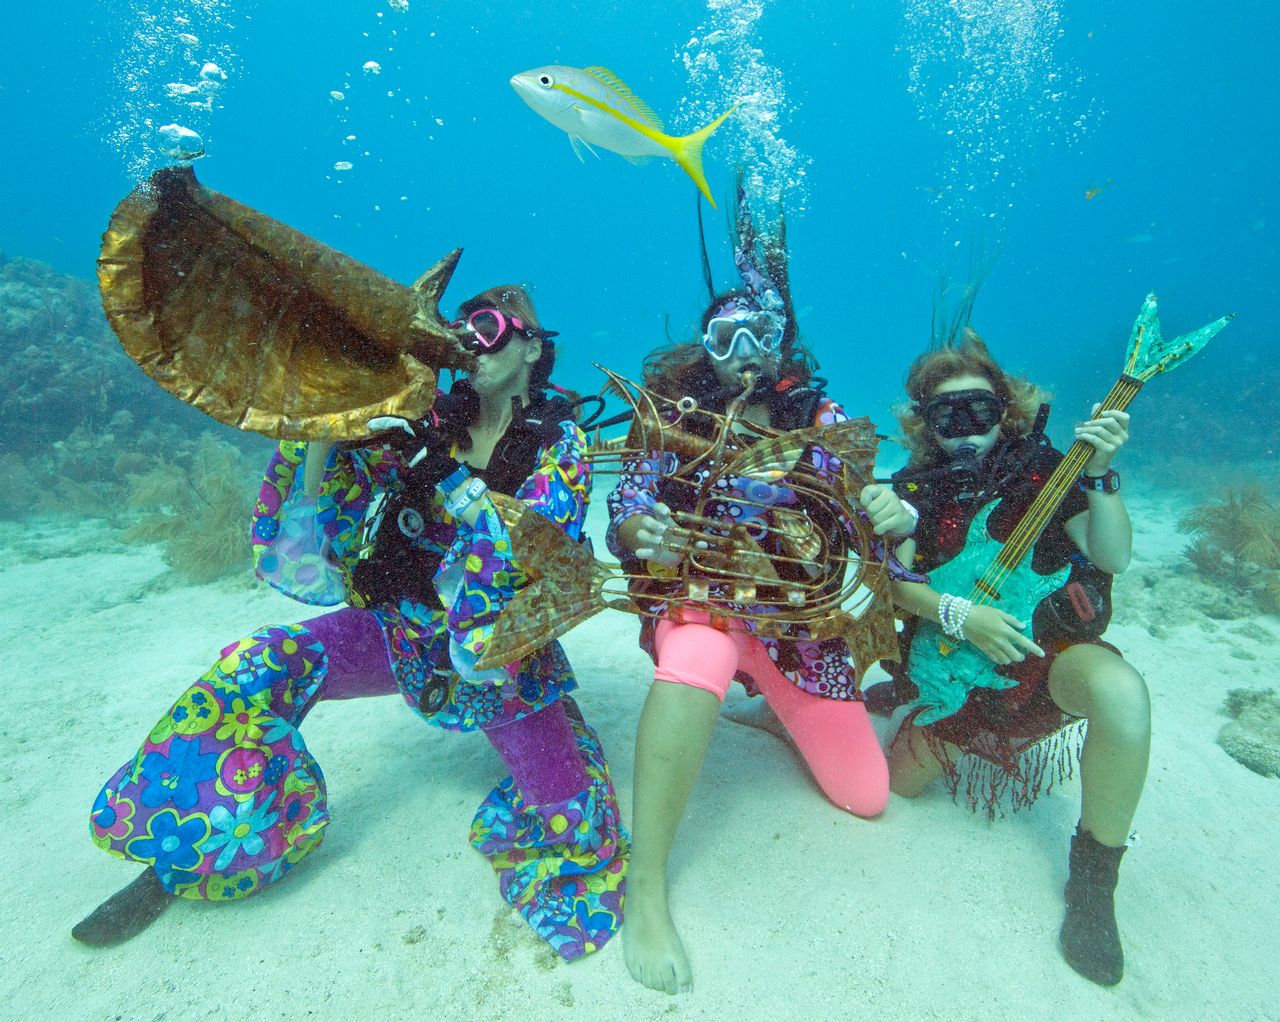 As well as colorful reef fish and other marine life, divers and snorkelers might even spot “mermaids” and costumed characters beneath the waves.